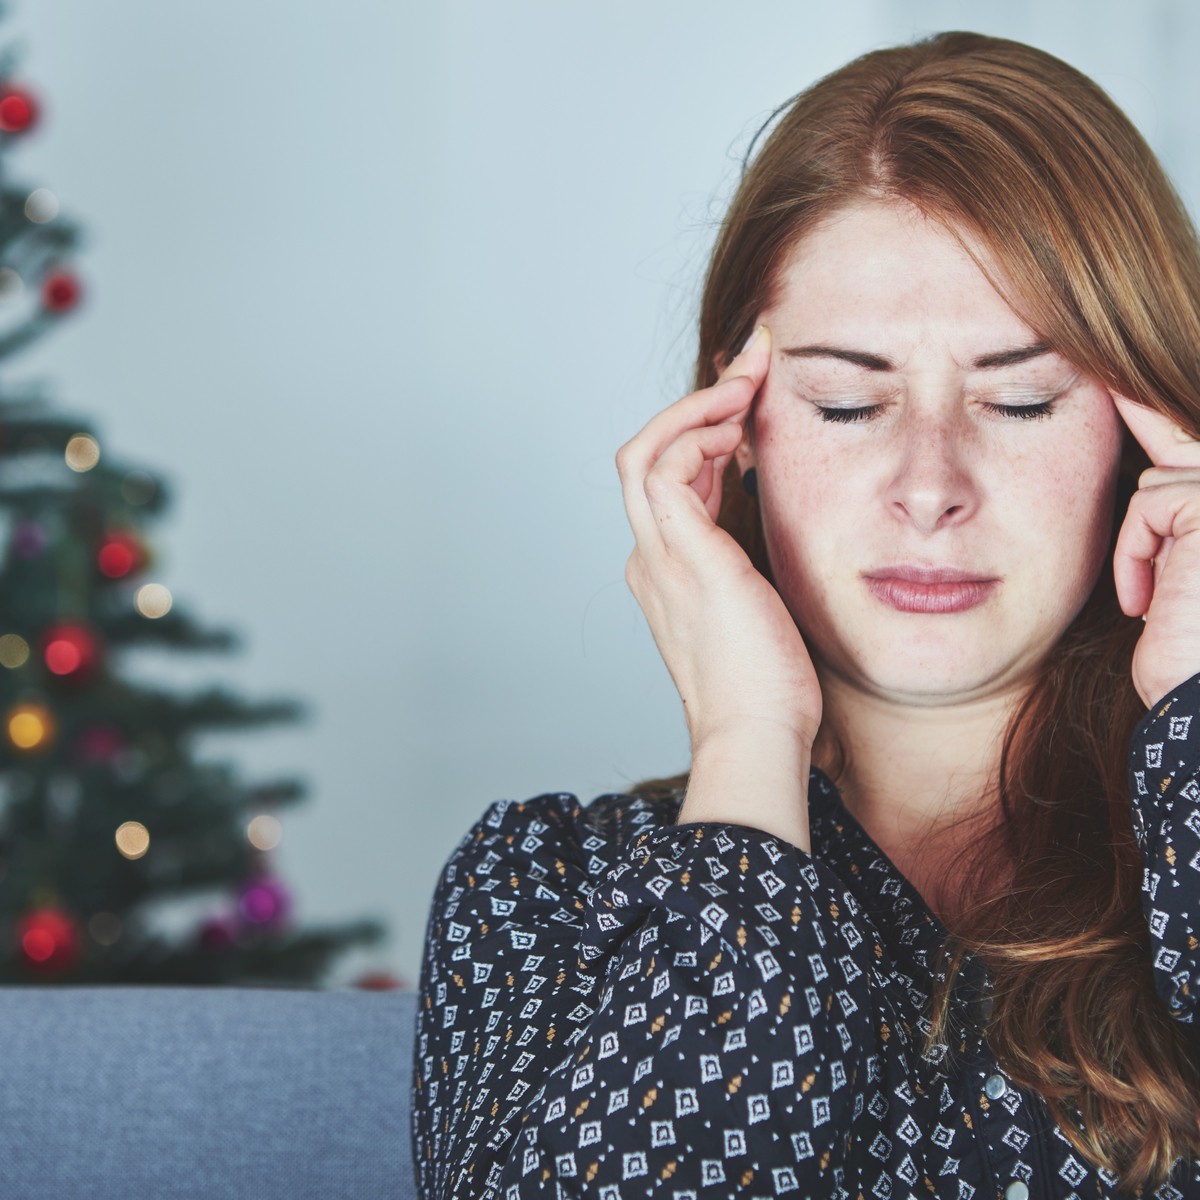 Is your Christmas turning into Stress-mas